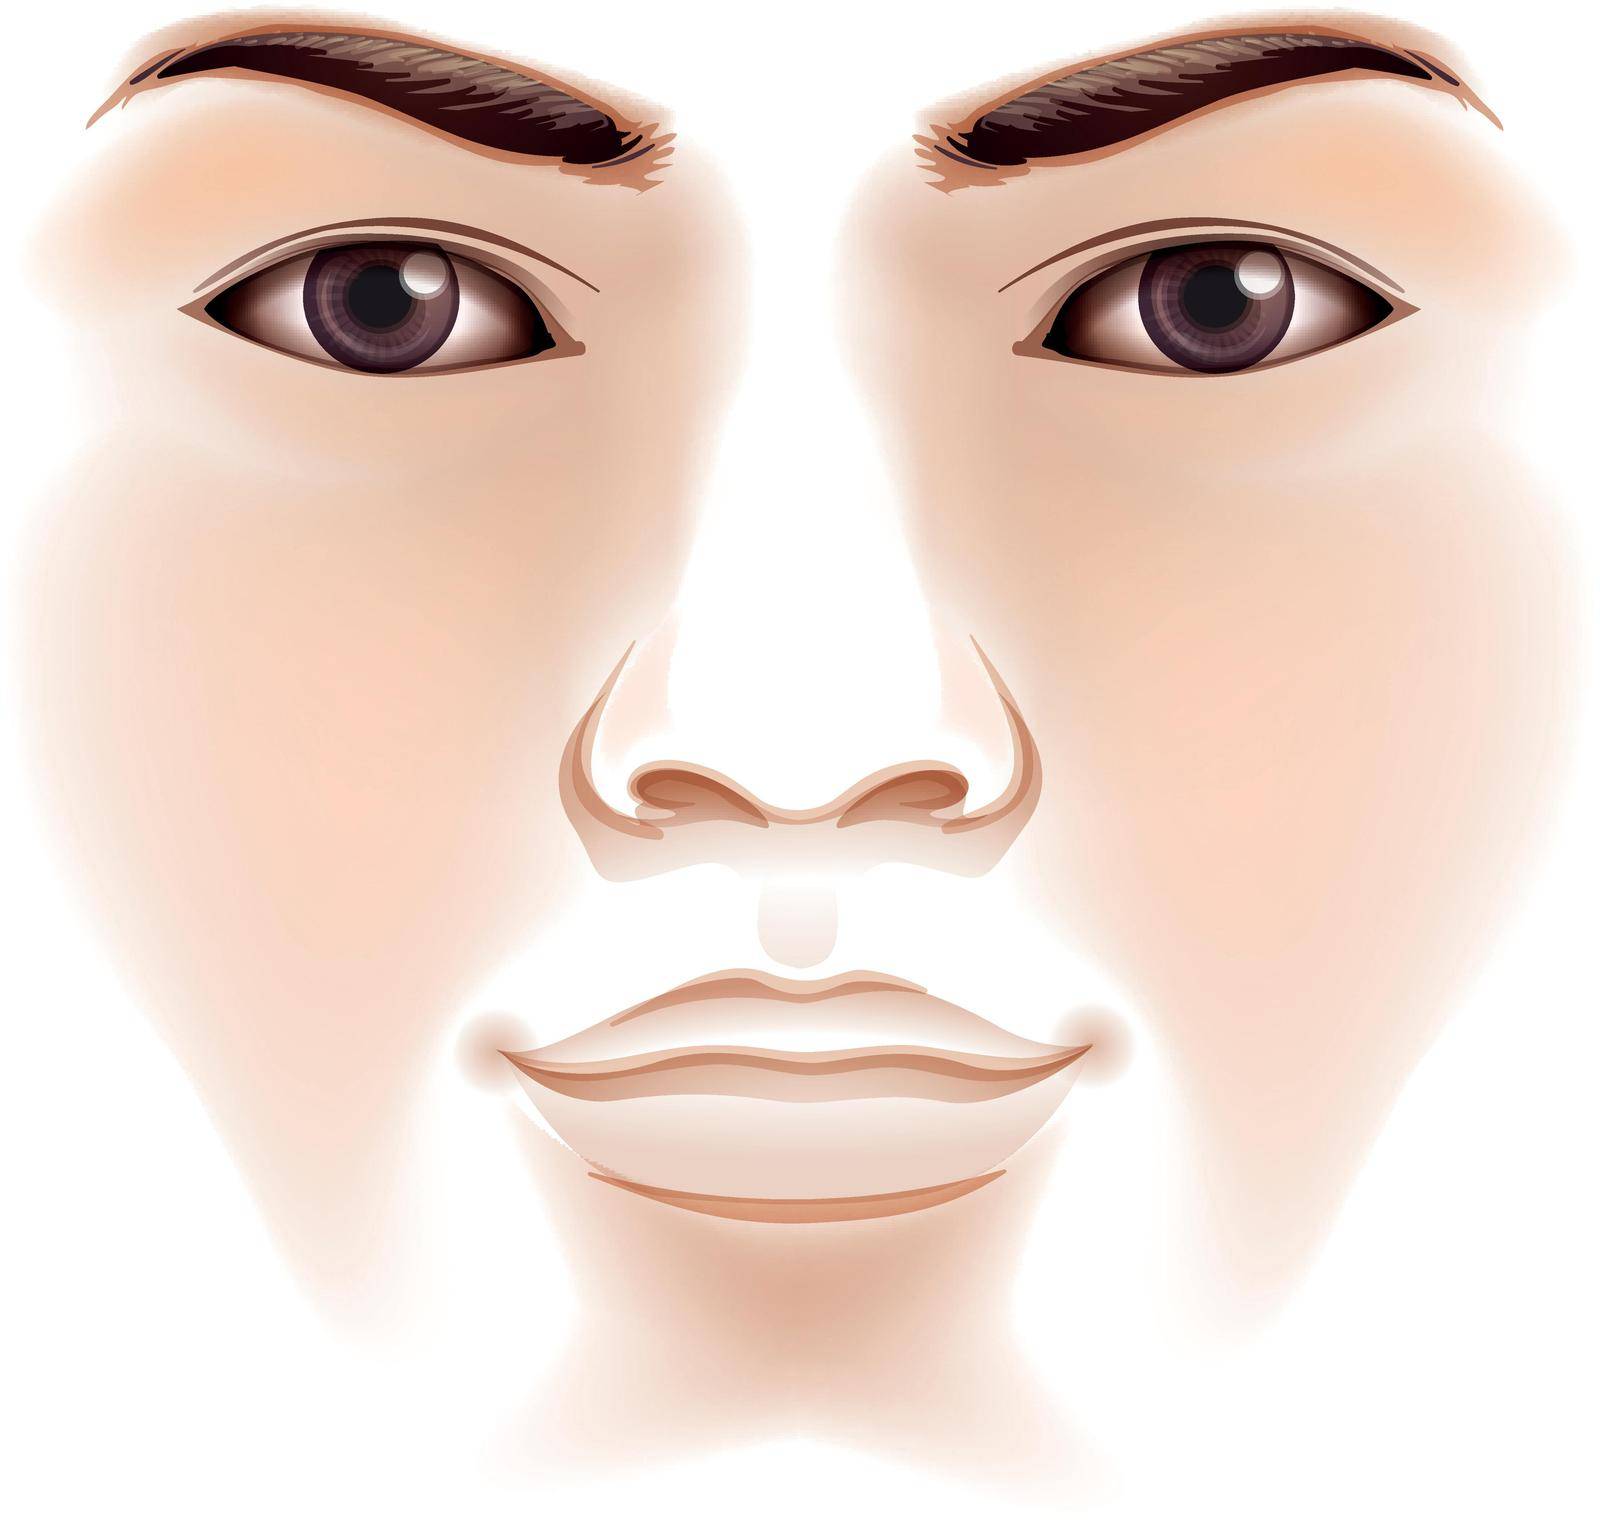 Illustration of the features of a human face